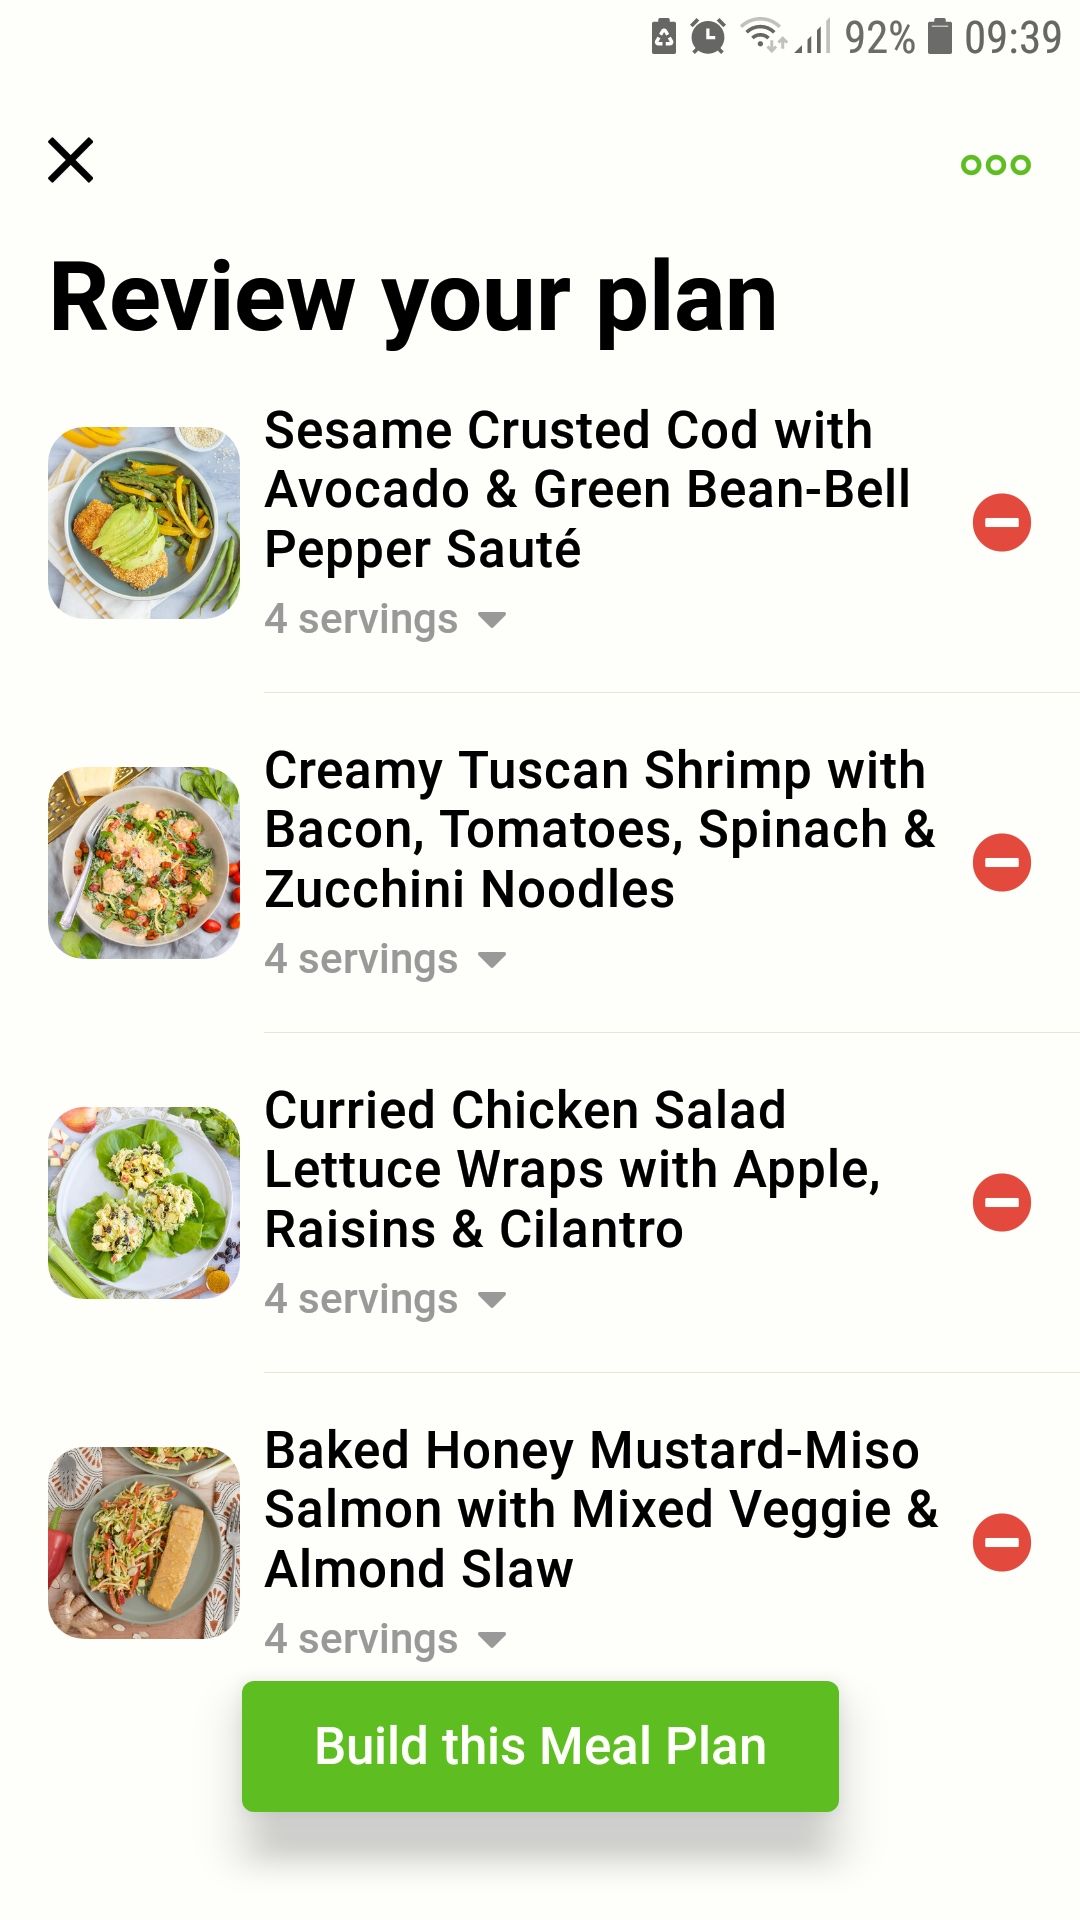 Mealime meal planning mobile app review plan